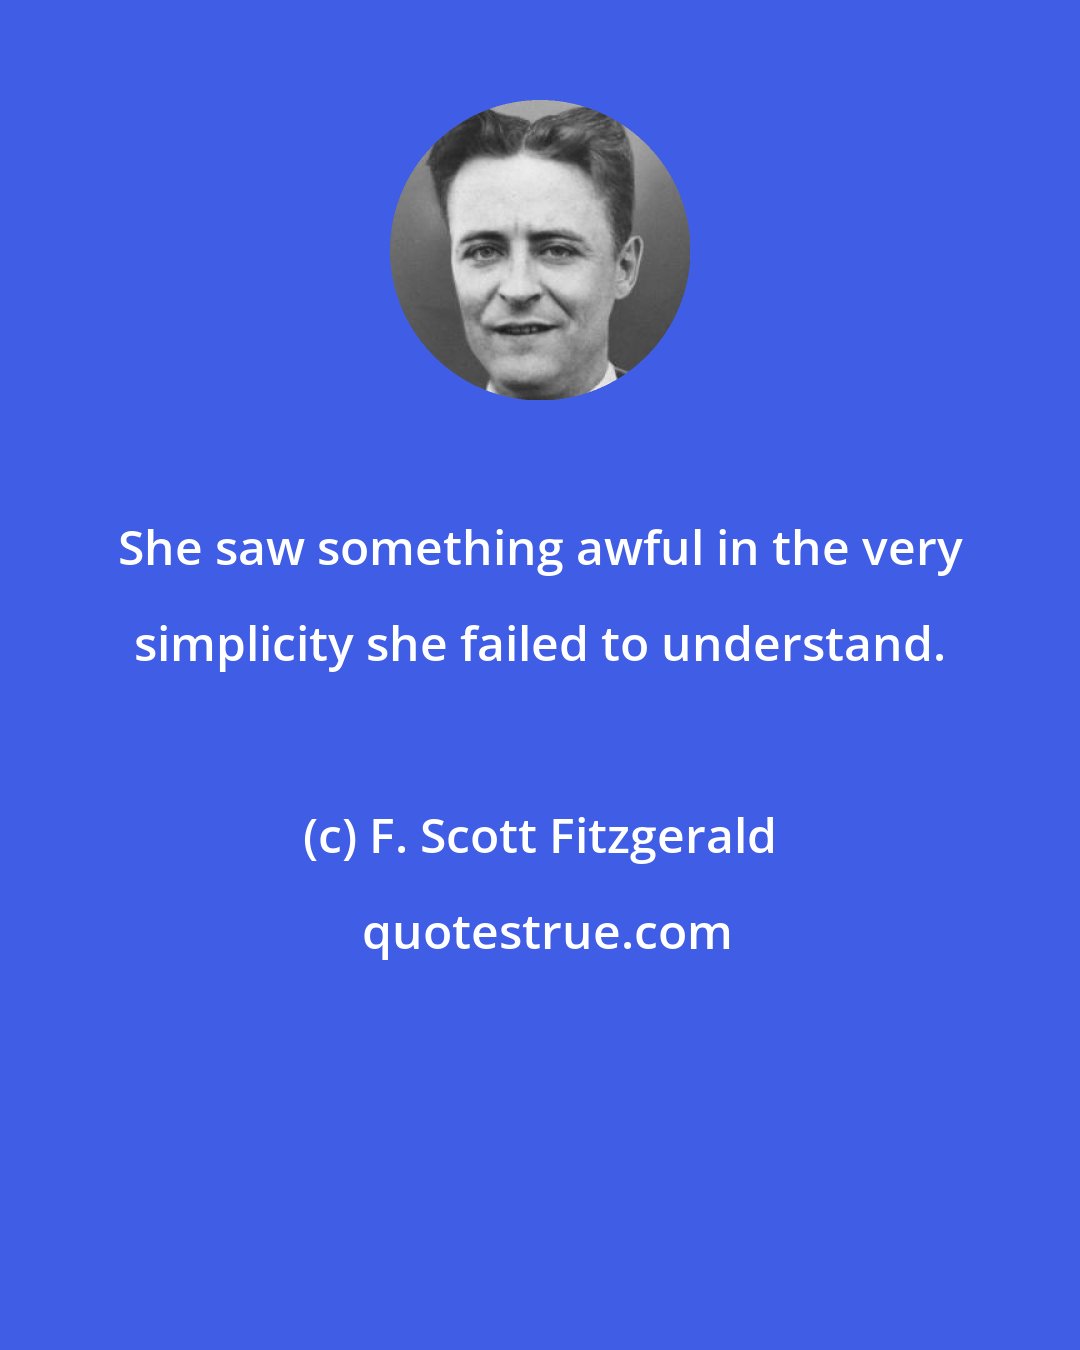 F. Scott Fitzgerald: She saw something awful in the very simplicity she failed to understand.